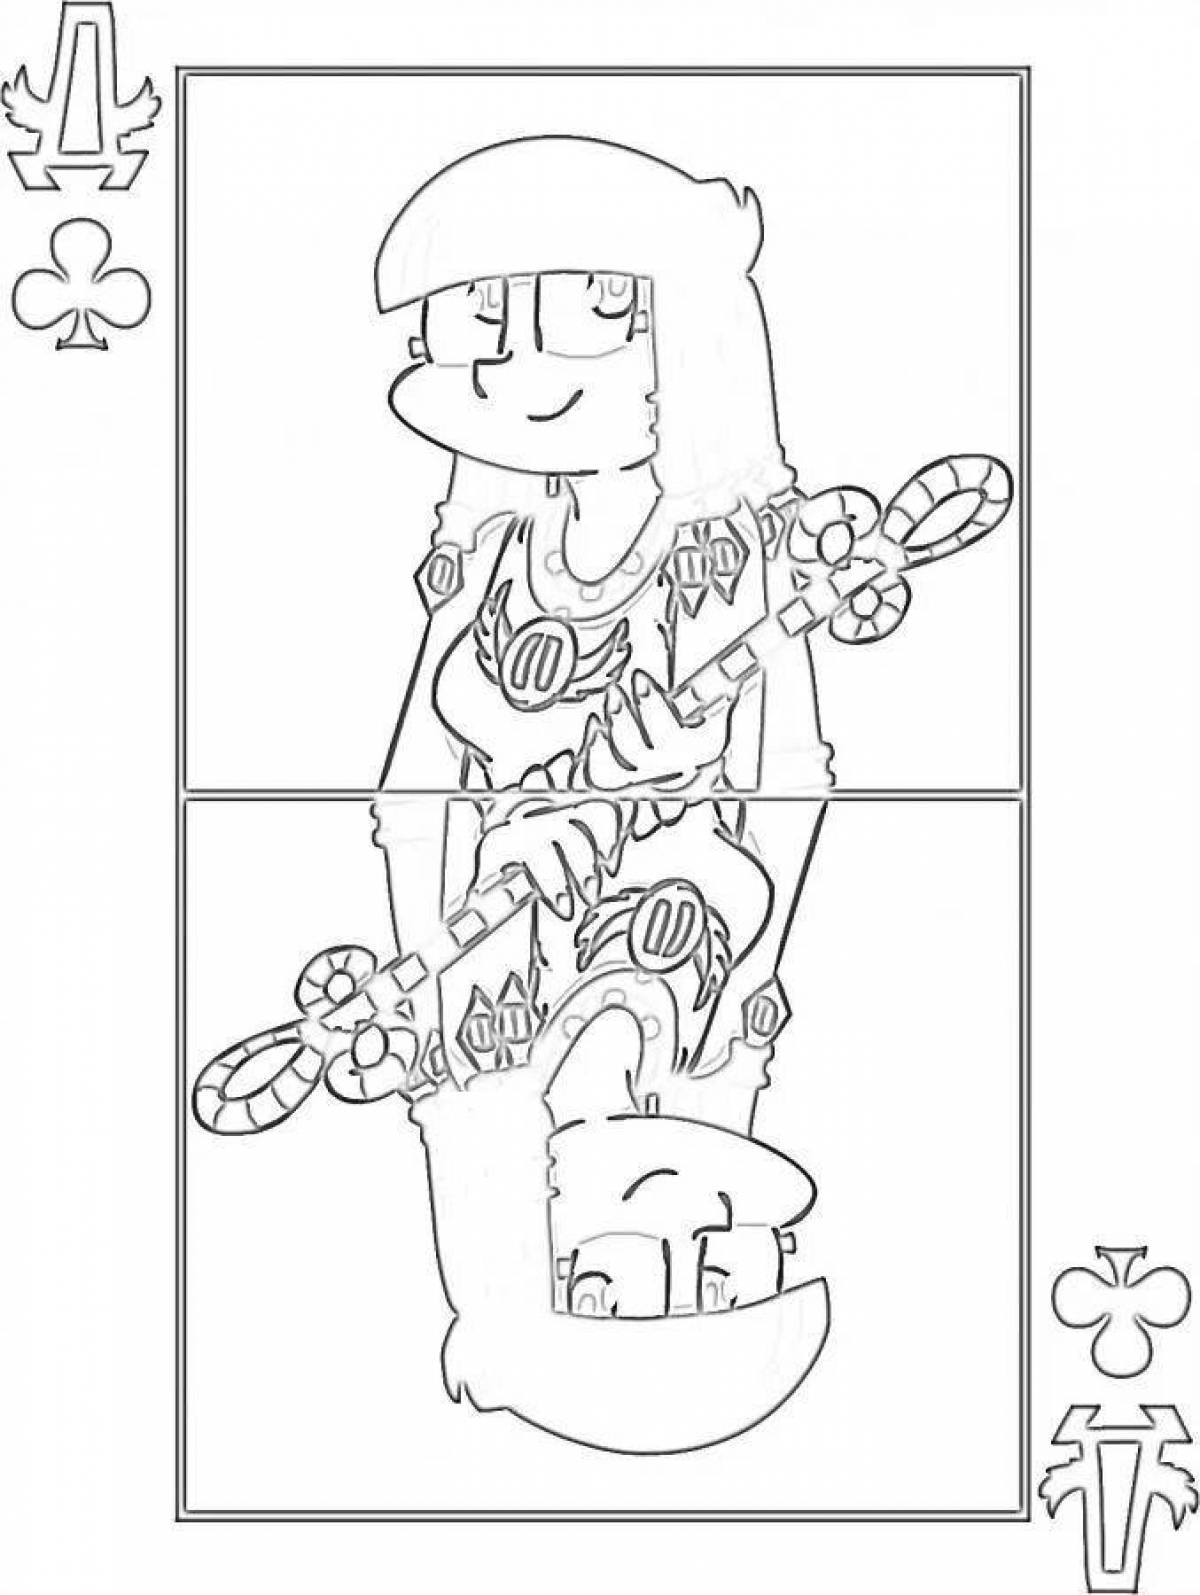 Jolly romeo 13 coloring cards